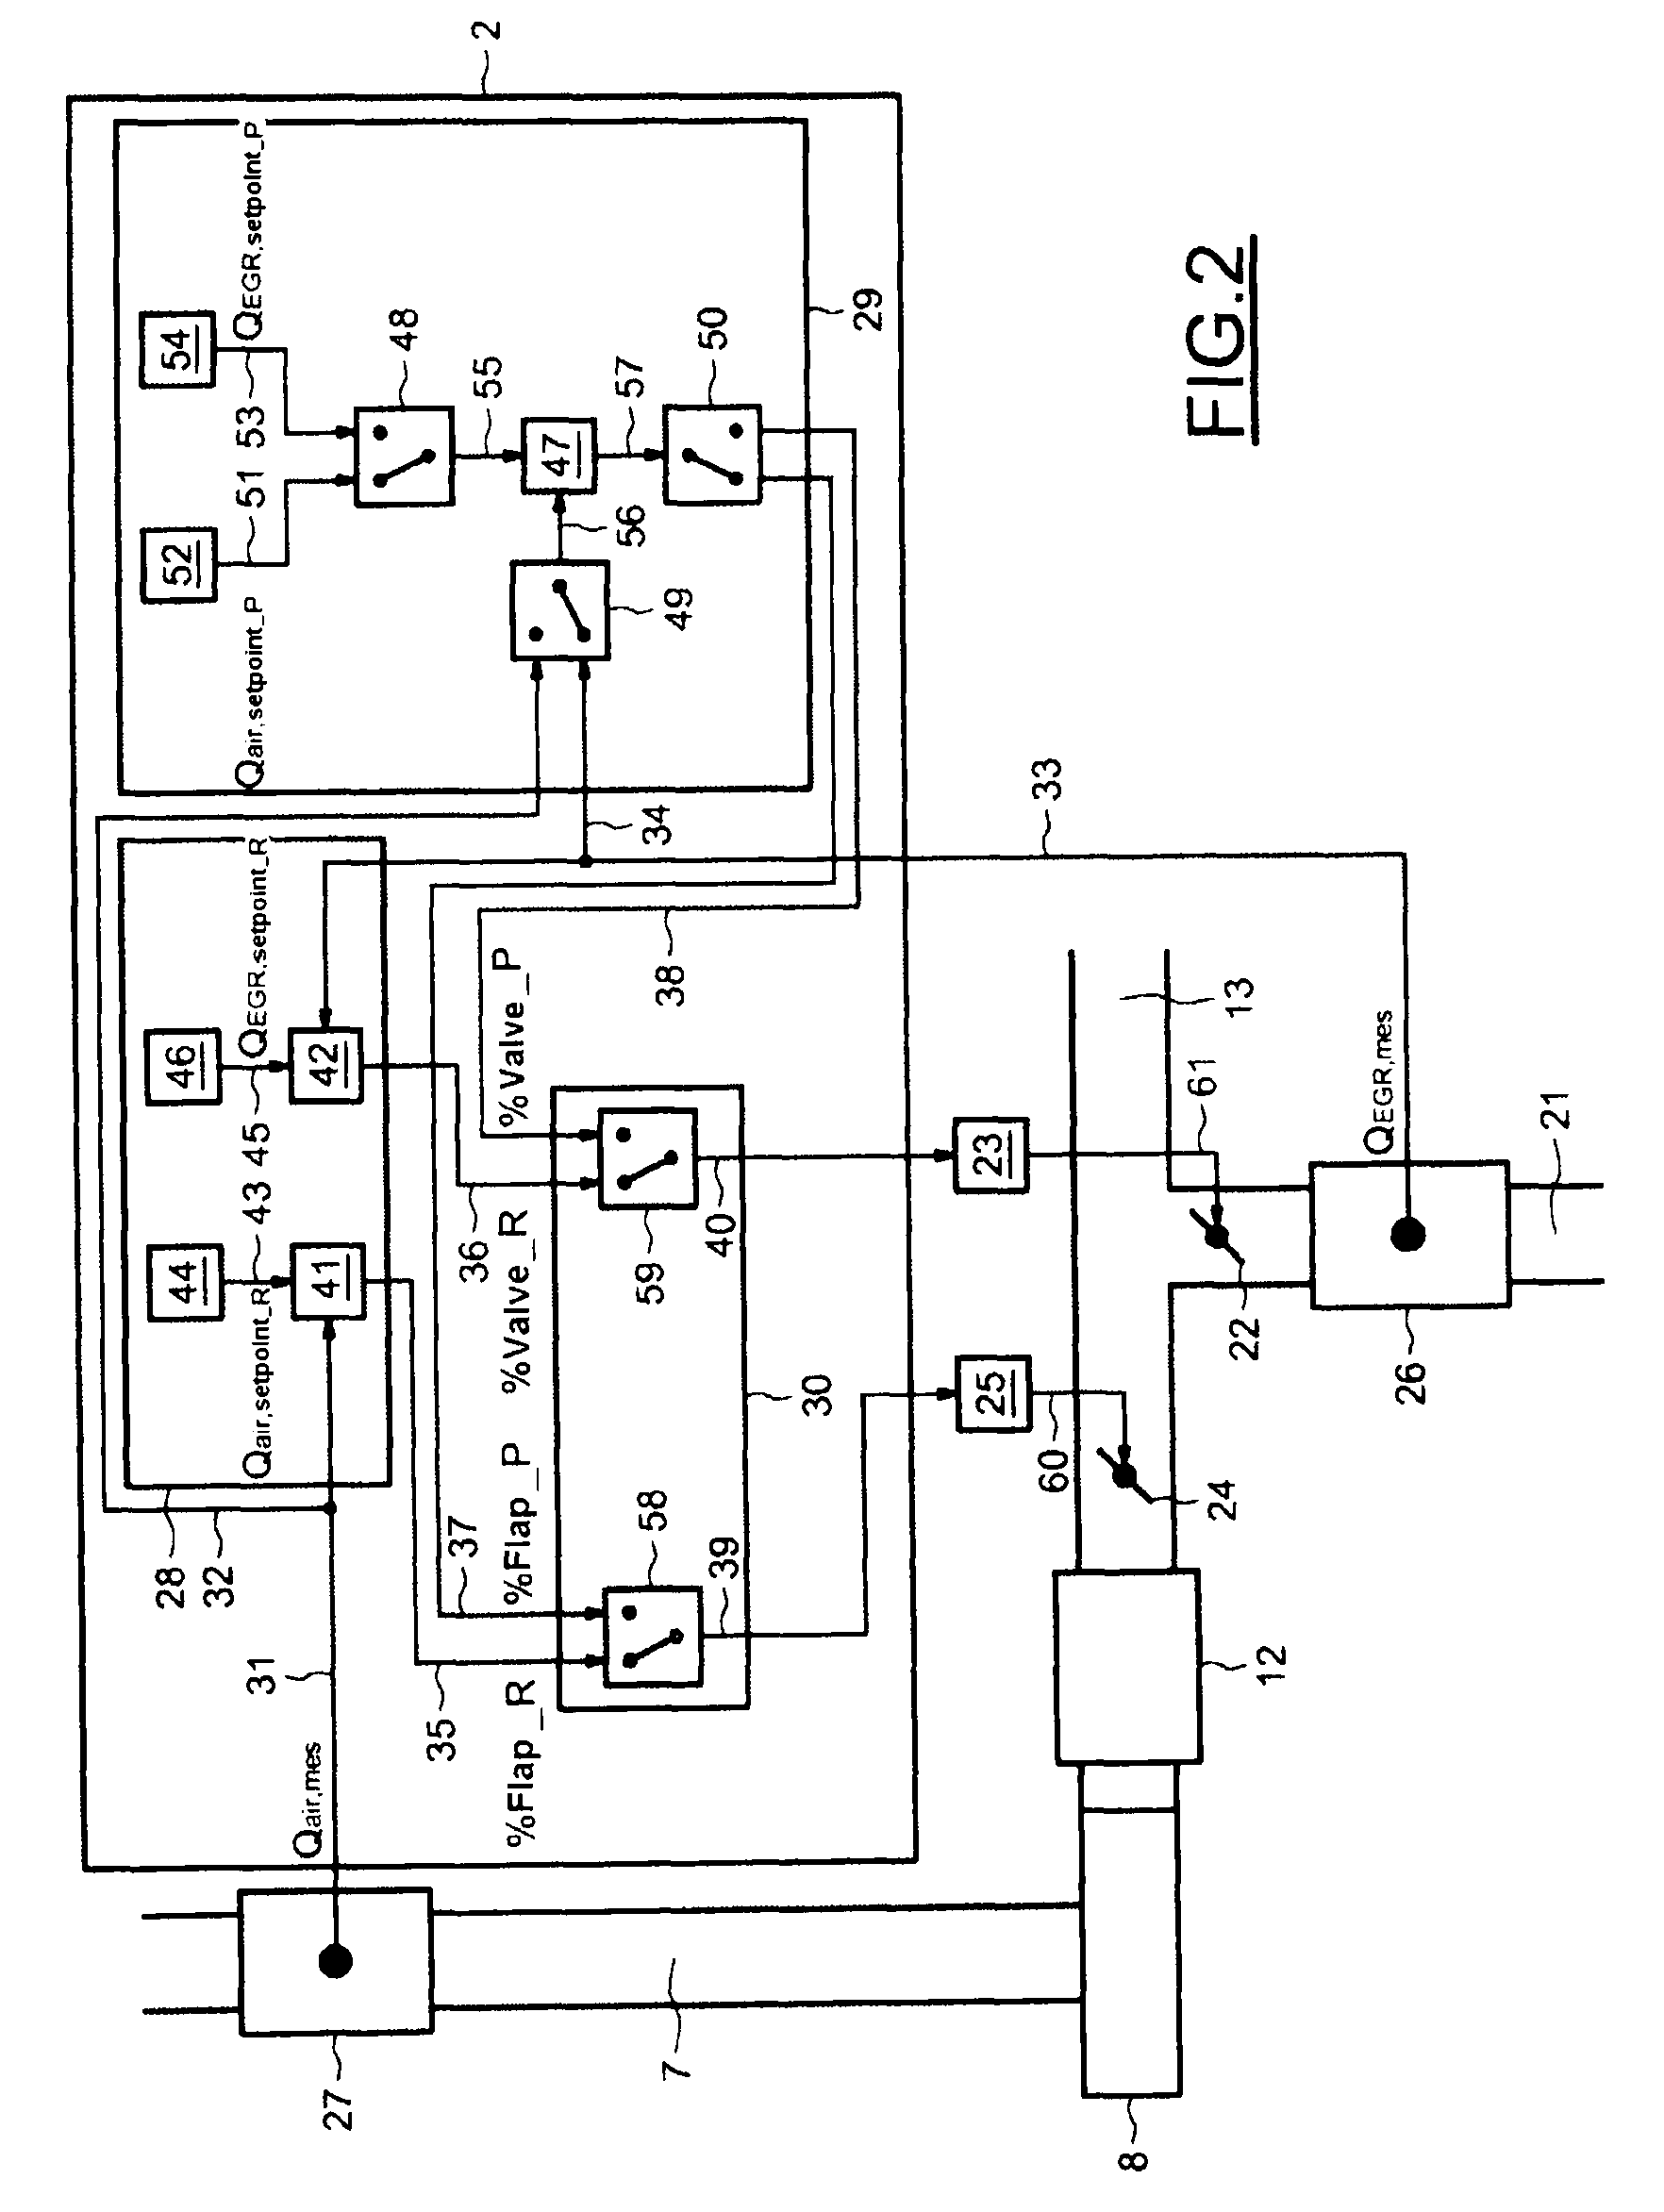 System and method for controlling the fresh air and burnt gases introduced into an internal combustion engine during transitions between the purging of a nitrogen oxides trap and the regeneration of a particulate filter